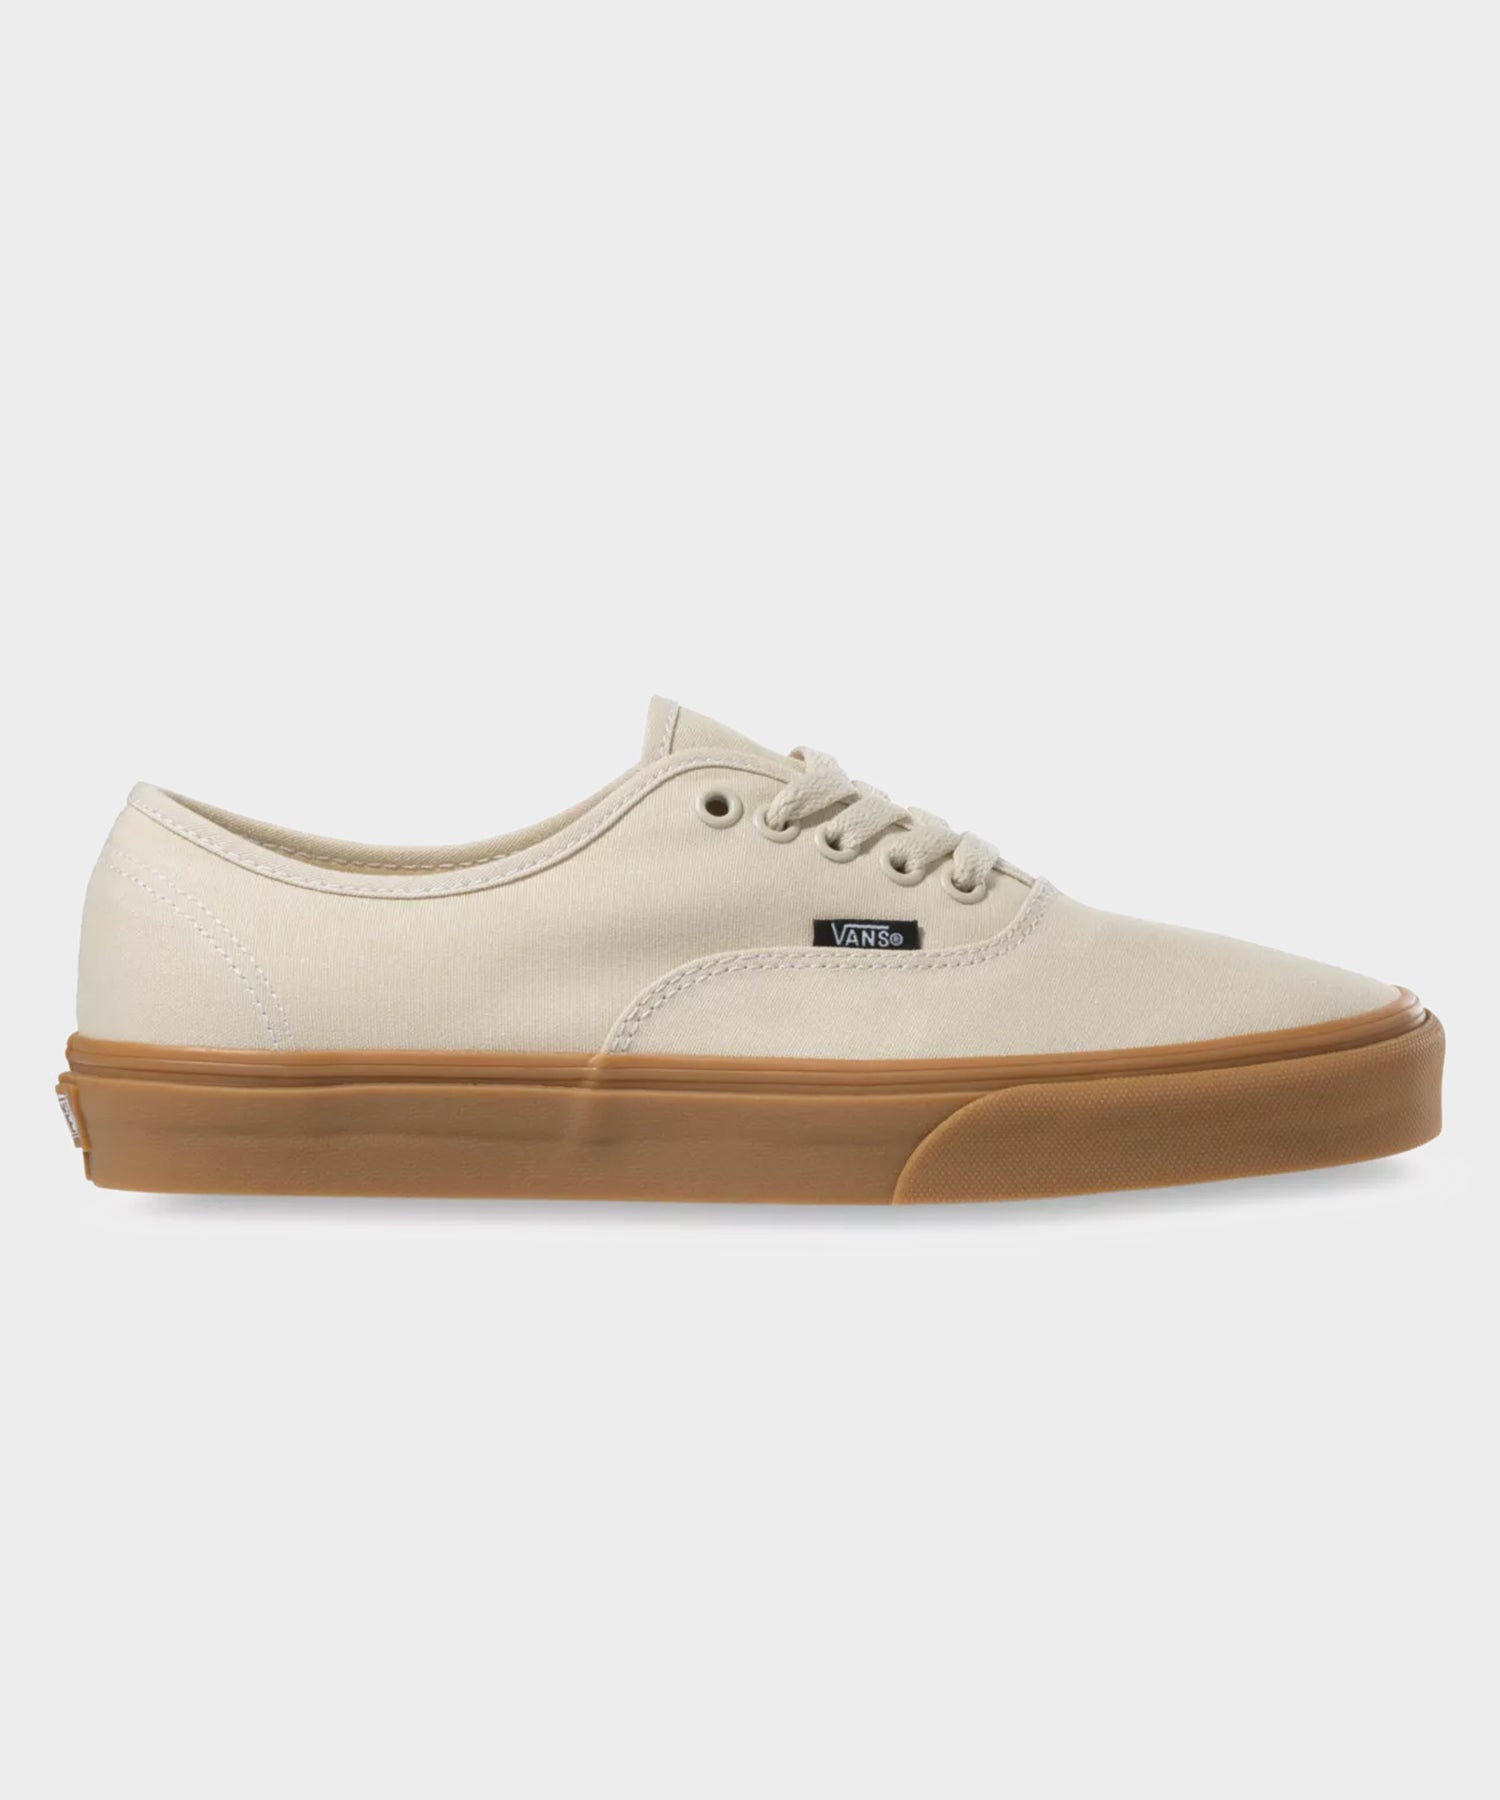 Vans Gum Authentic in Oatmeal - Todd Snyder